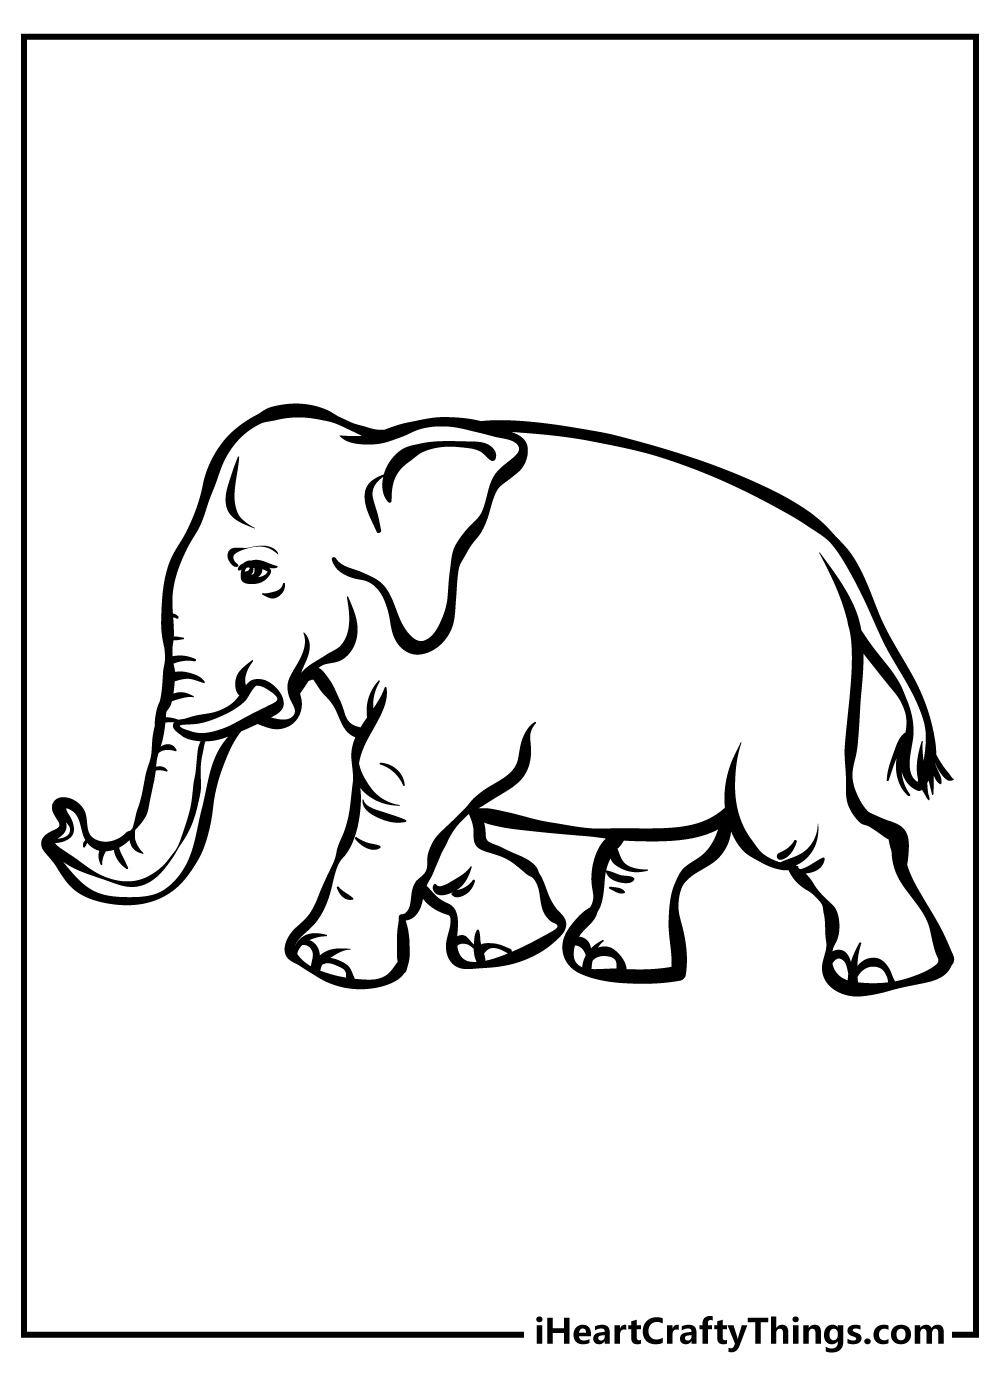 Elephant coloring pages free printable